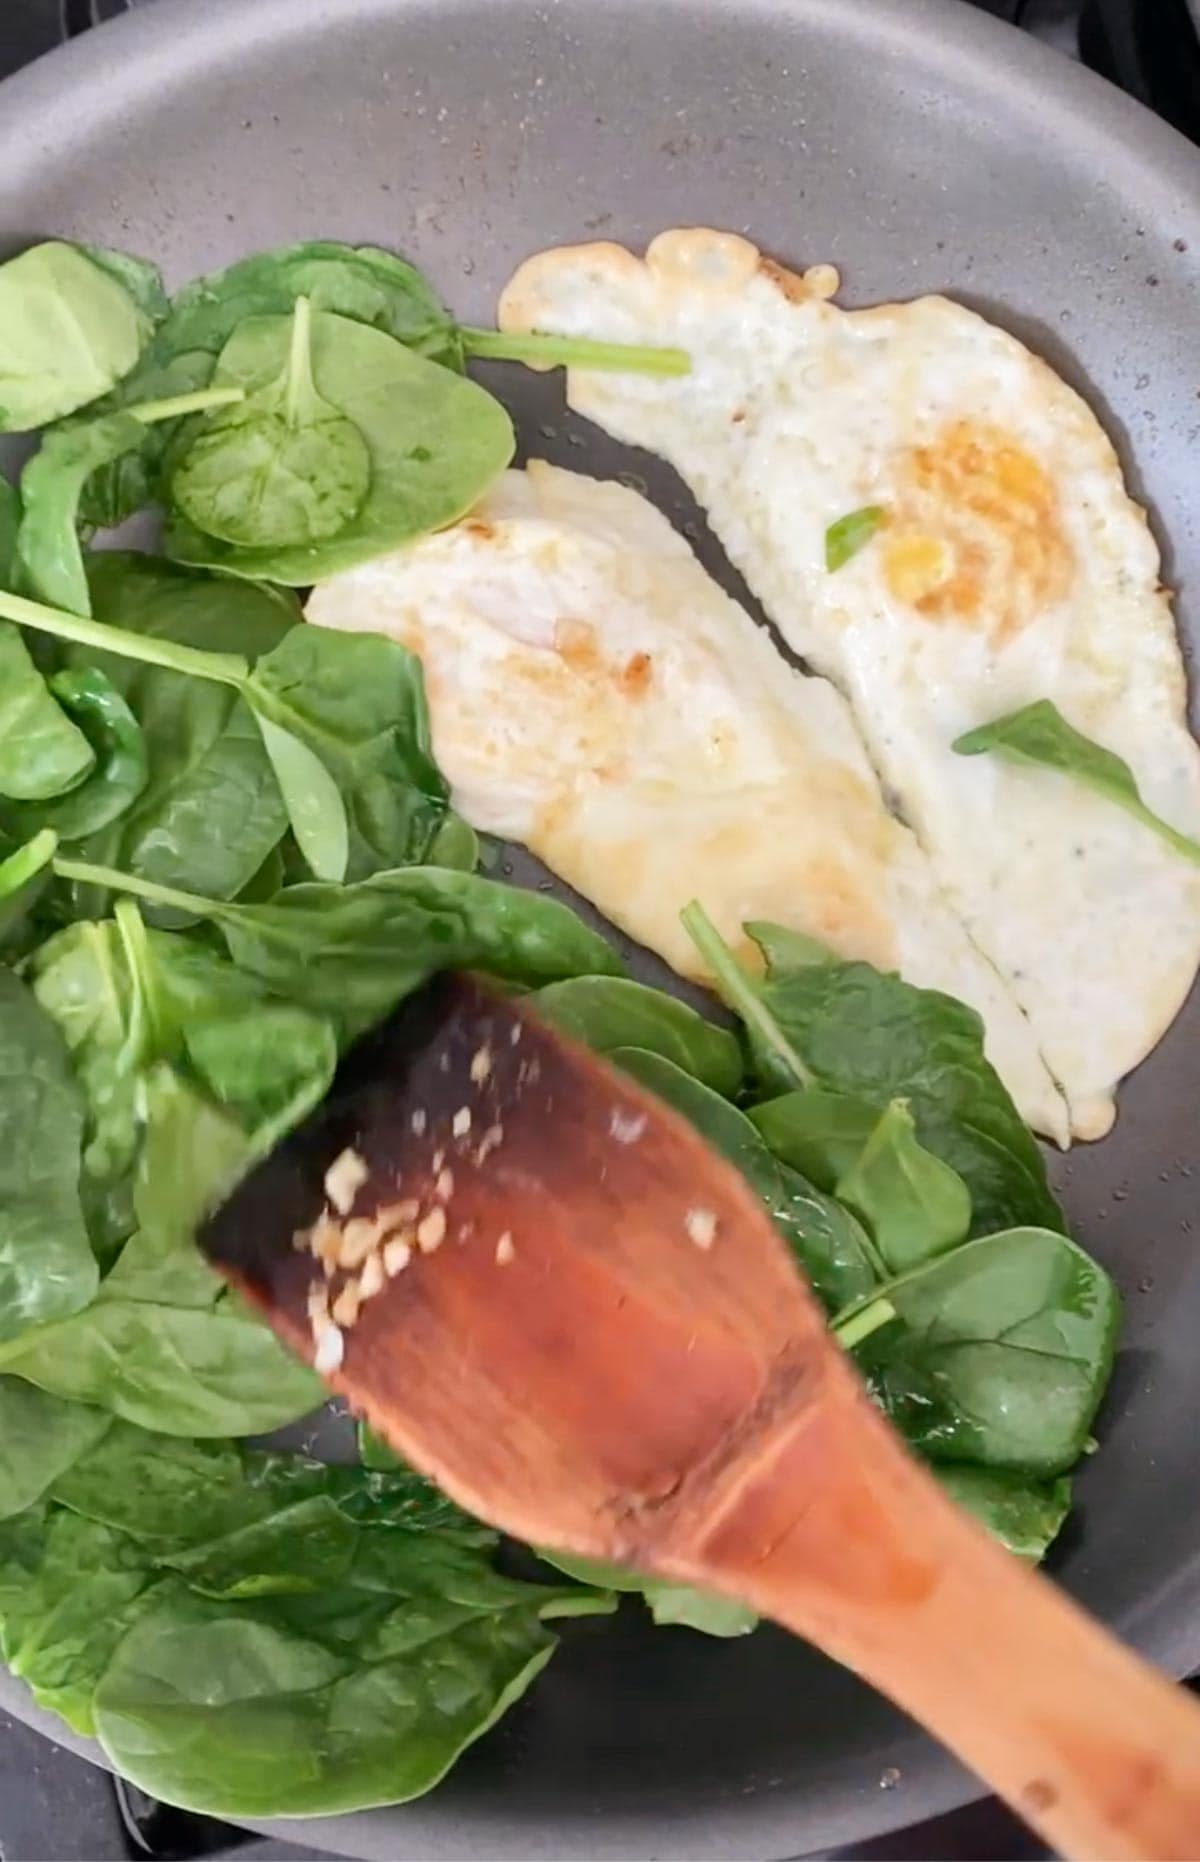 Cooking spinach and eggs together in one pan.